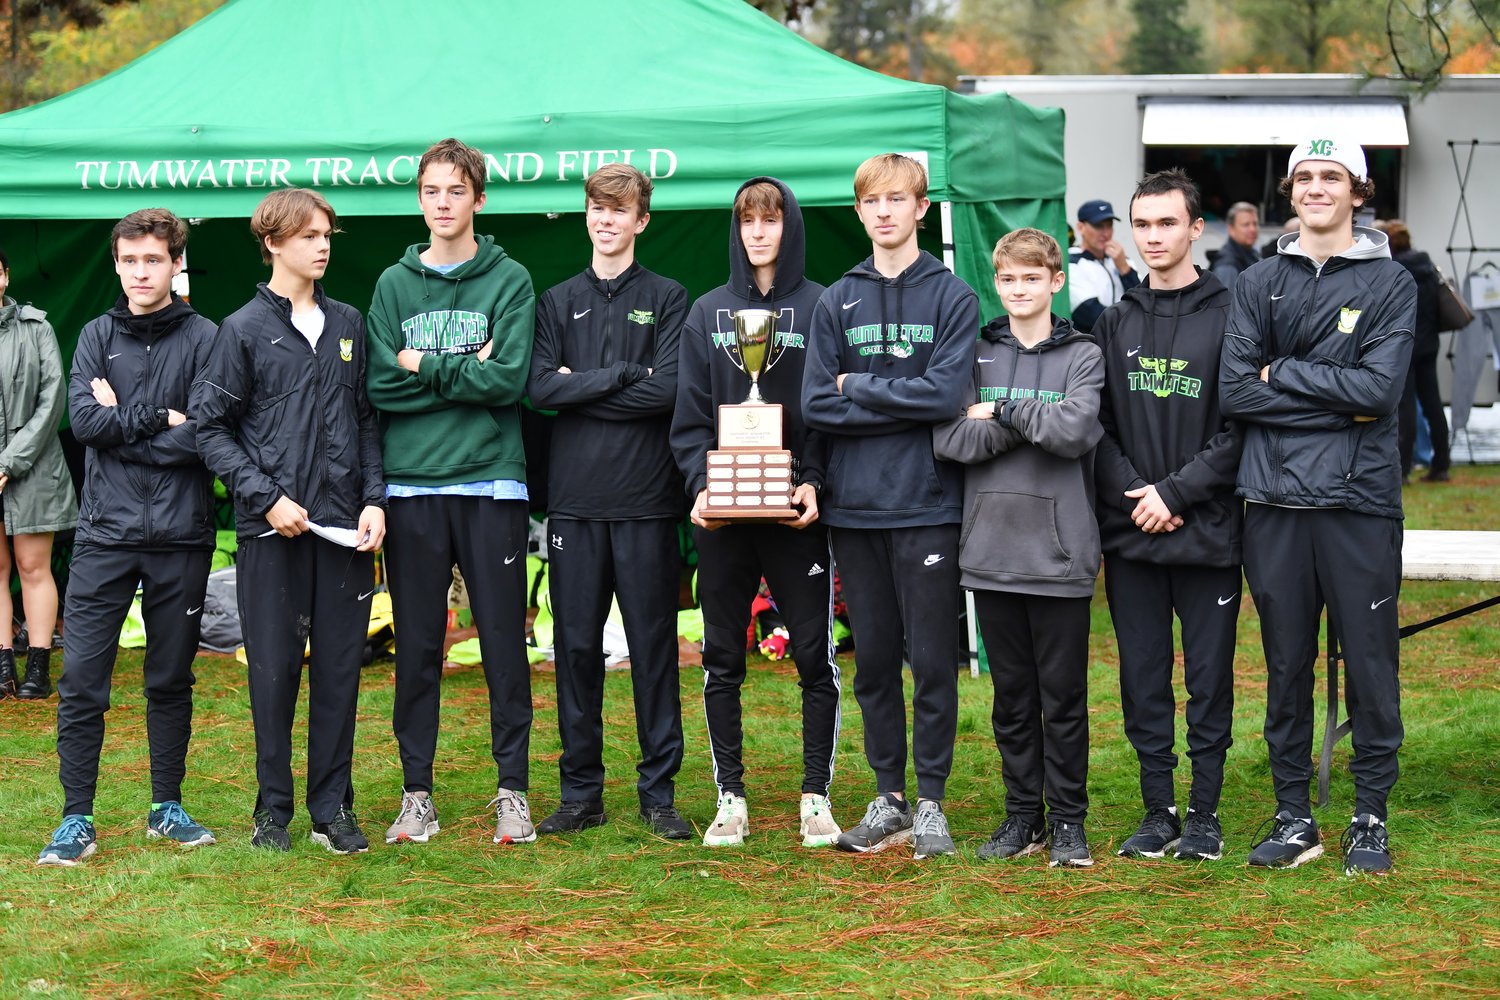 The Tumwater boys team poses with the district championship trophy after the District 4 Cross Country Championships Oct. 28.